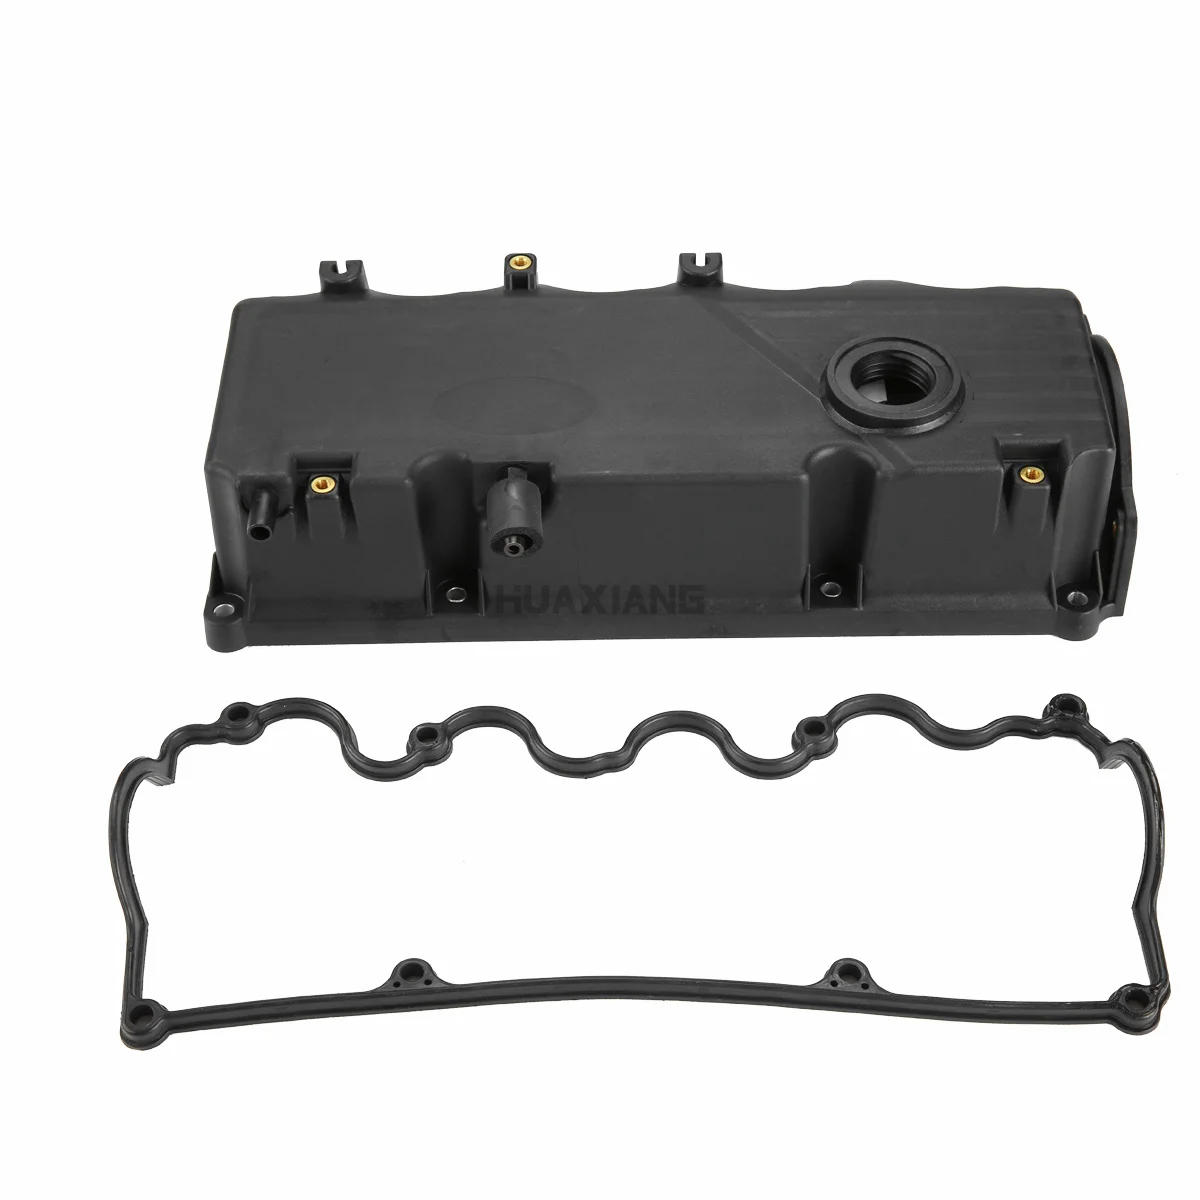 

RTS Engine Valve Cover+Gasket for Hyundai Accent 2000-2003 L4 1.5L SOHC 2241022610 2241022610 22410 22610